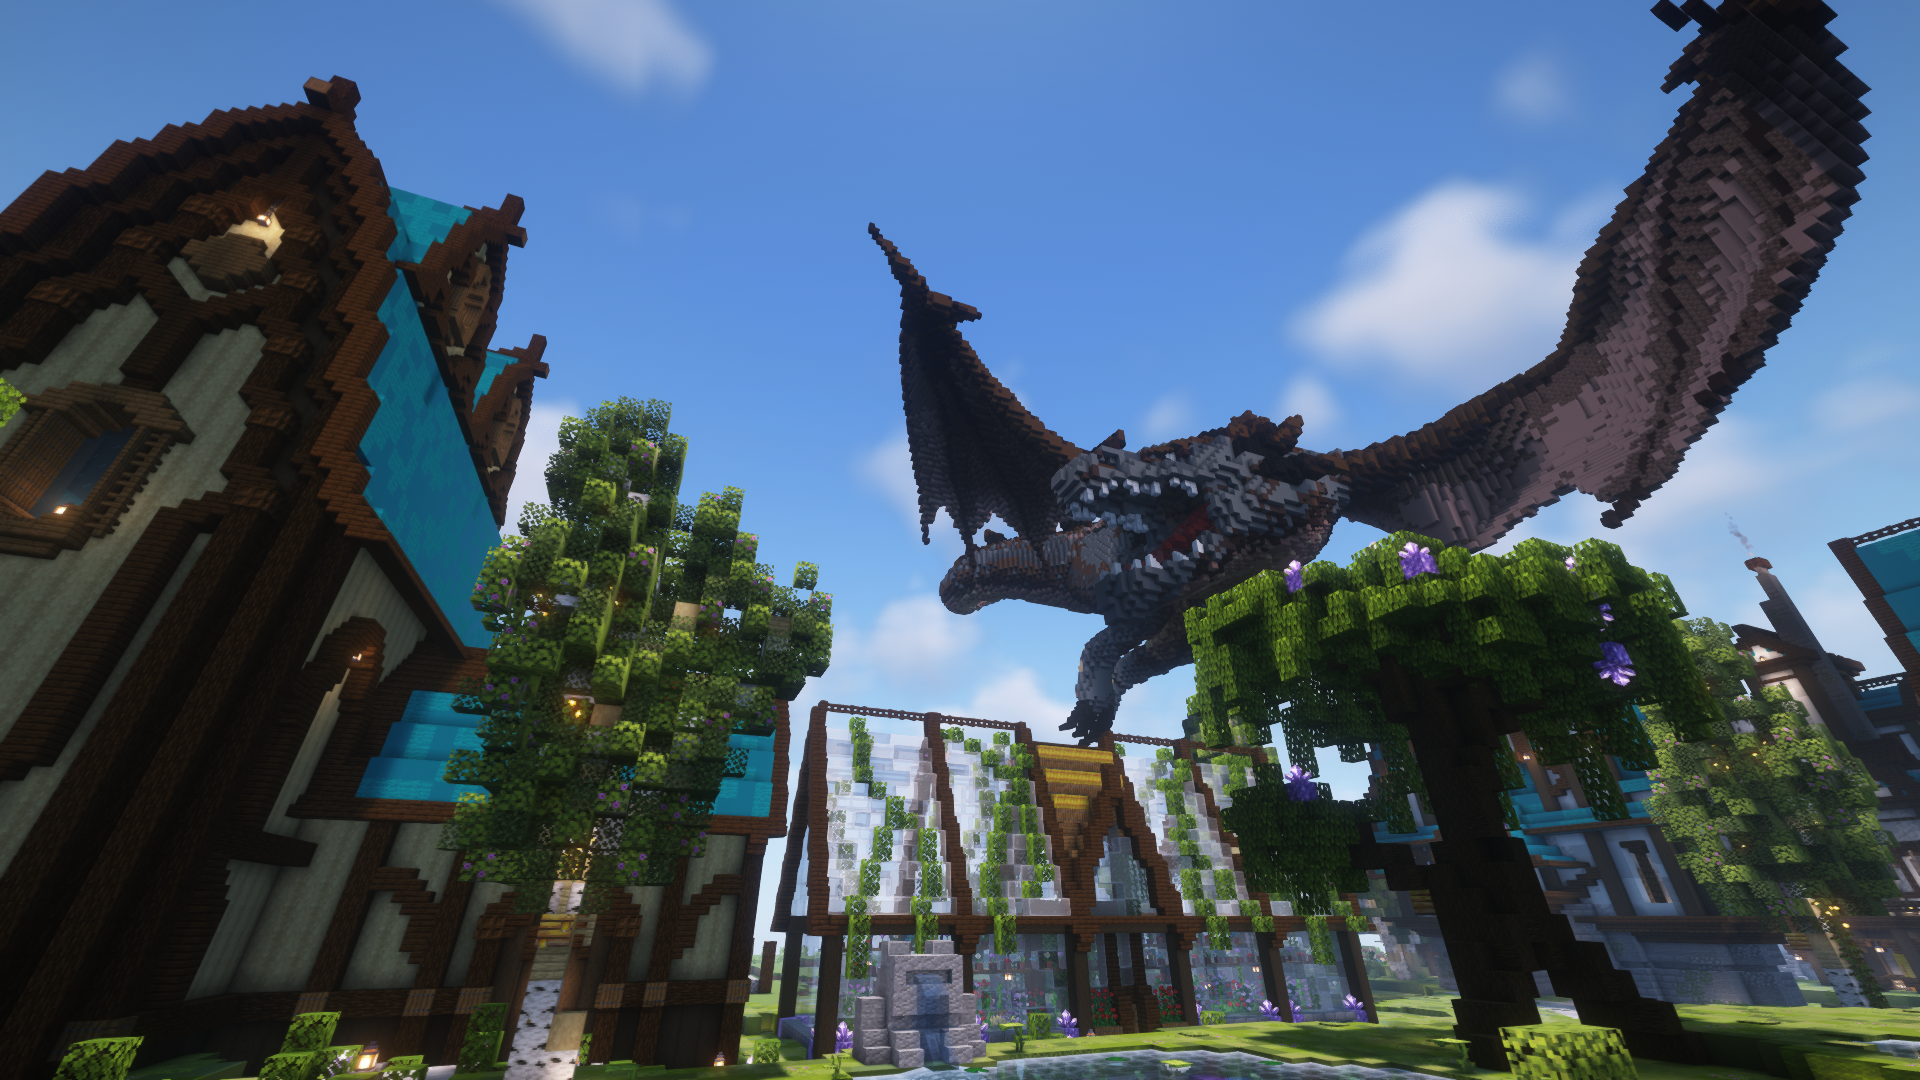 Dragon flying over a minecraft village